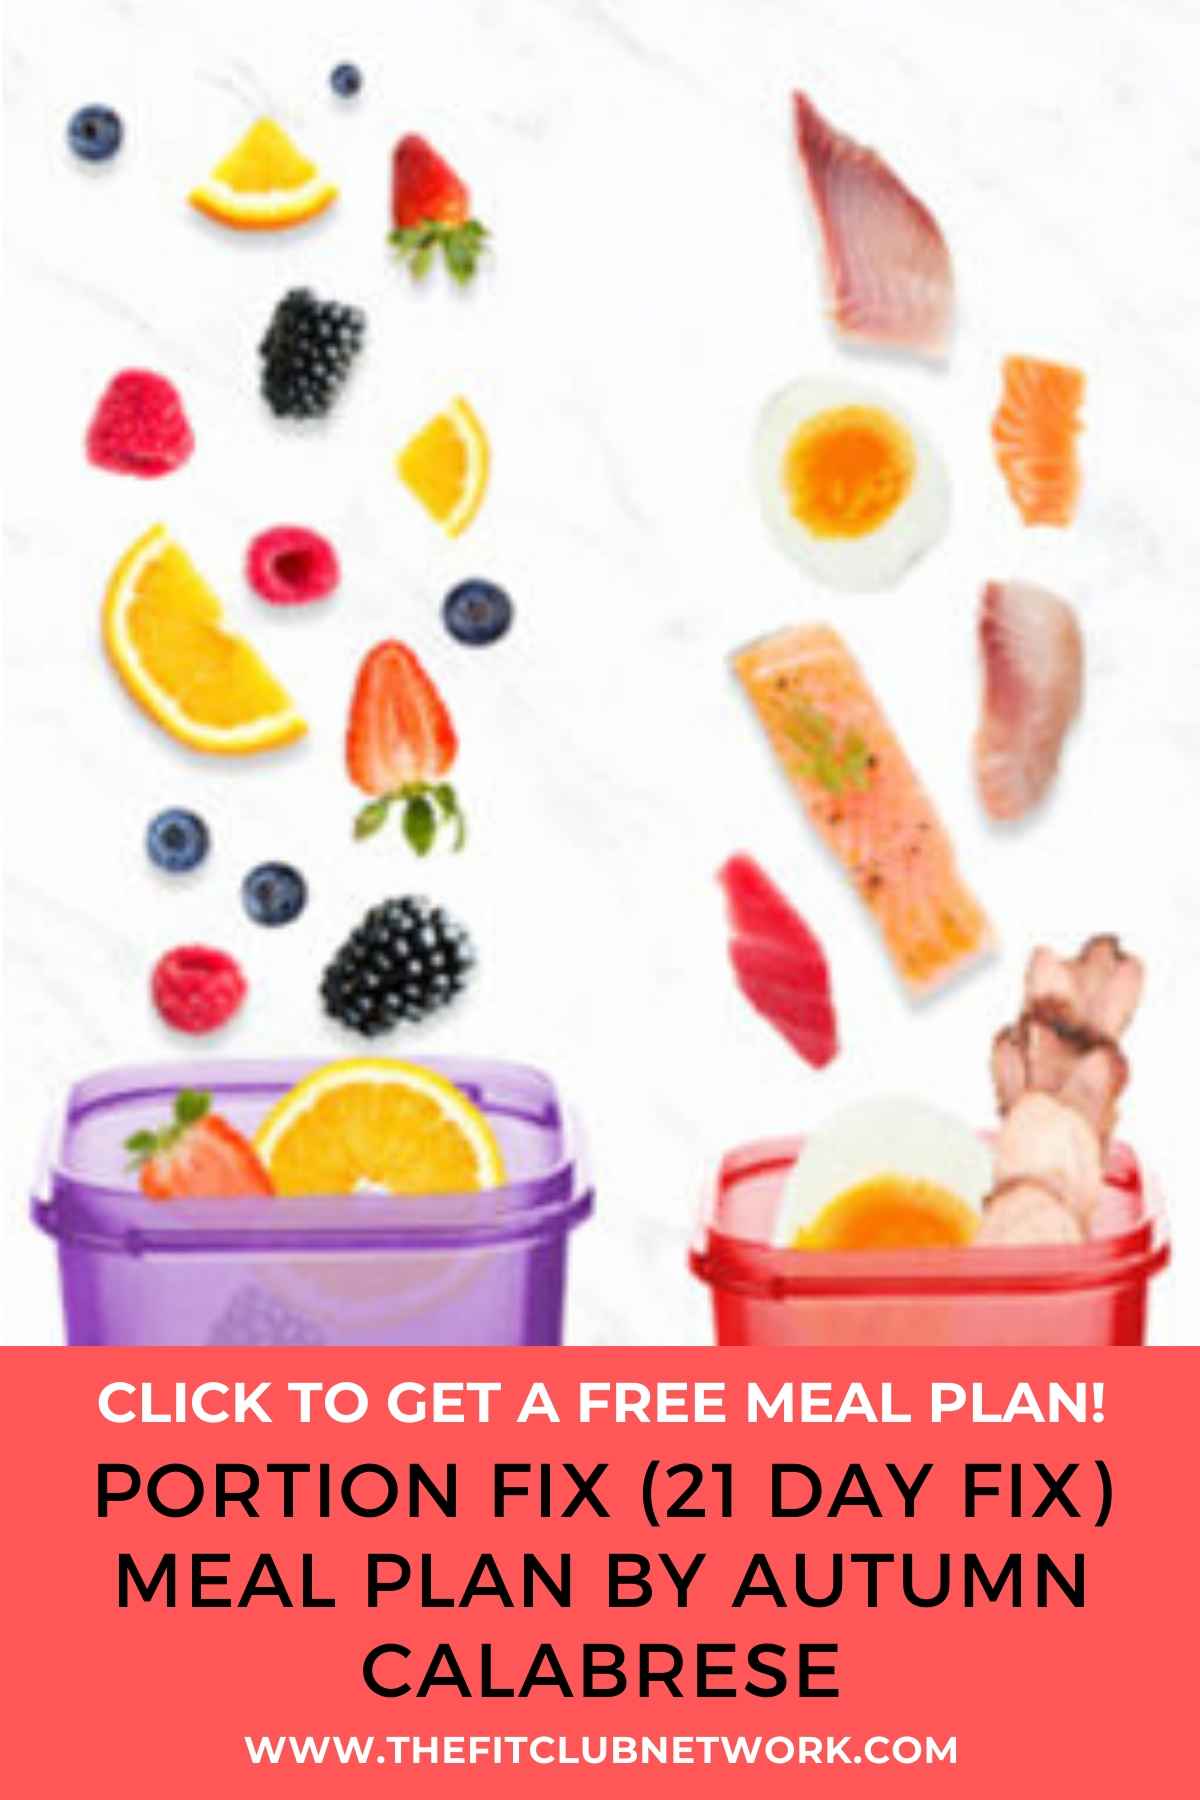 Shopping made easy and fun Coach Monica's FREE Portion Fix / 21